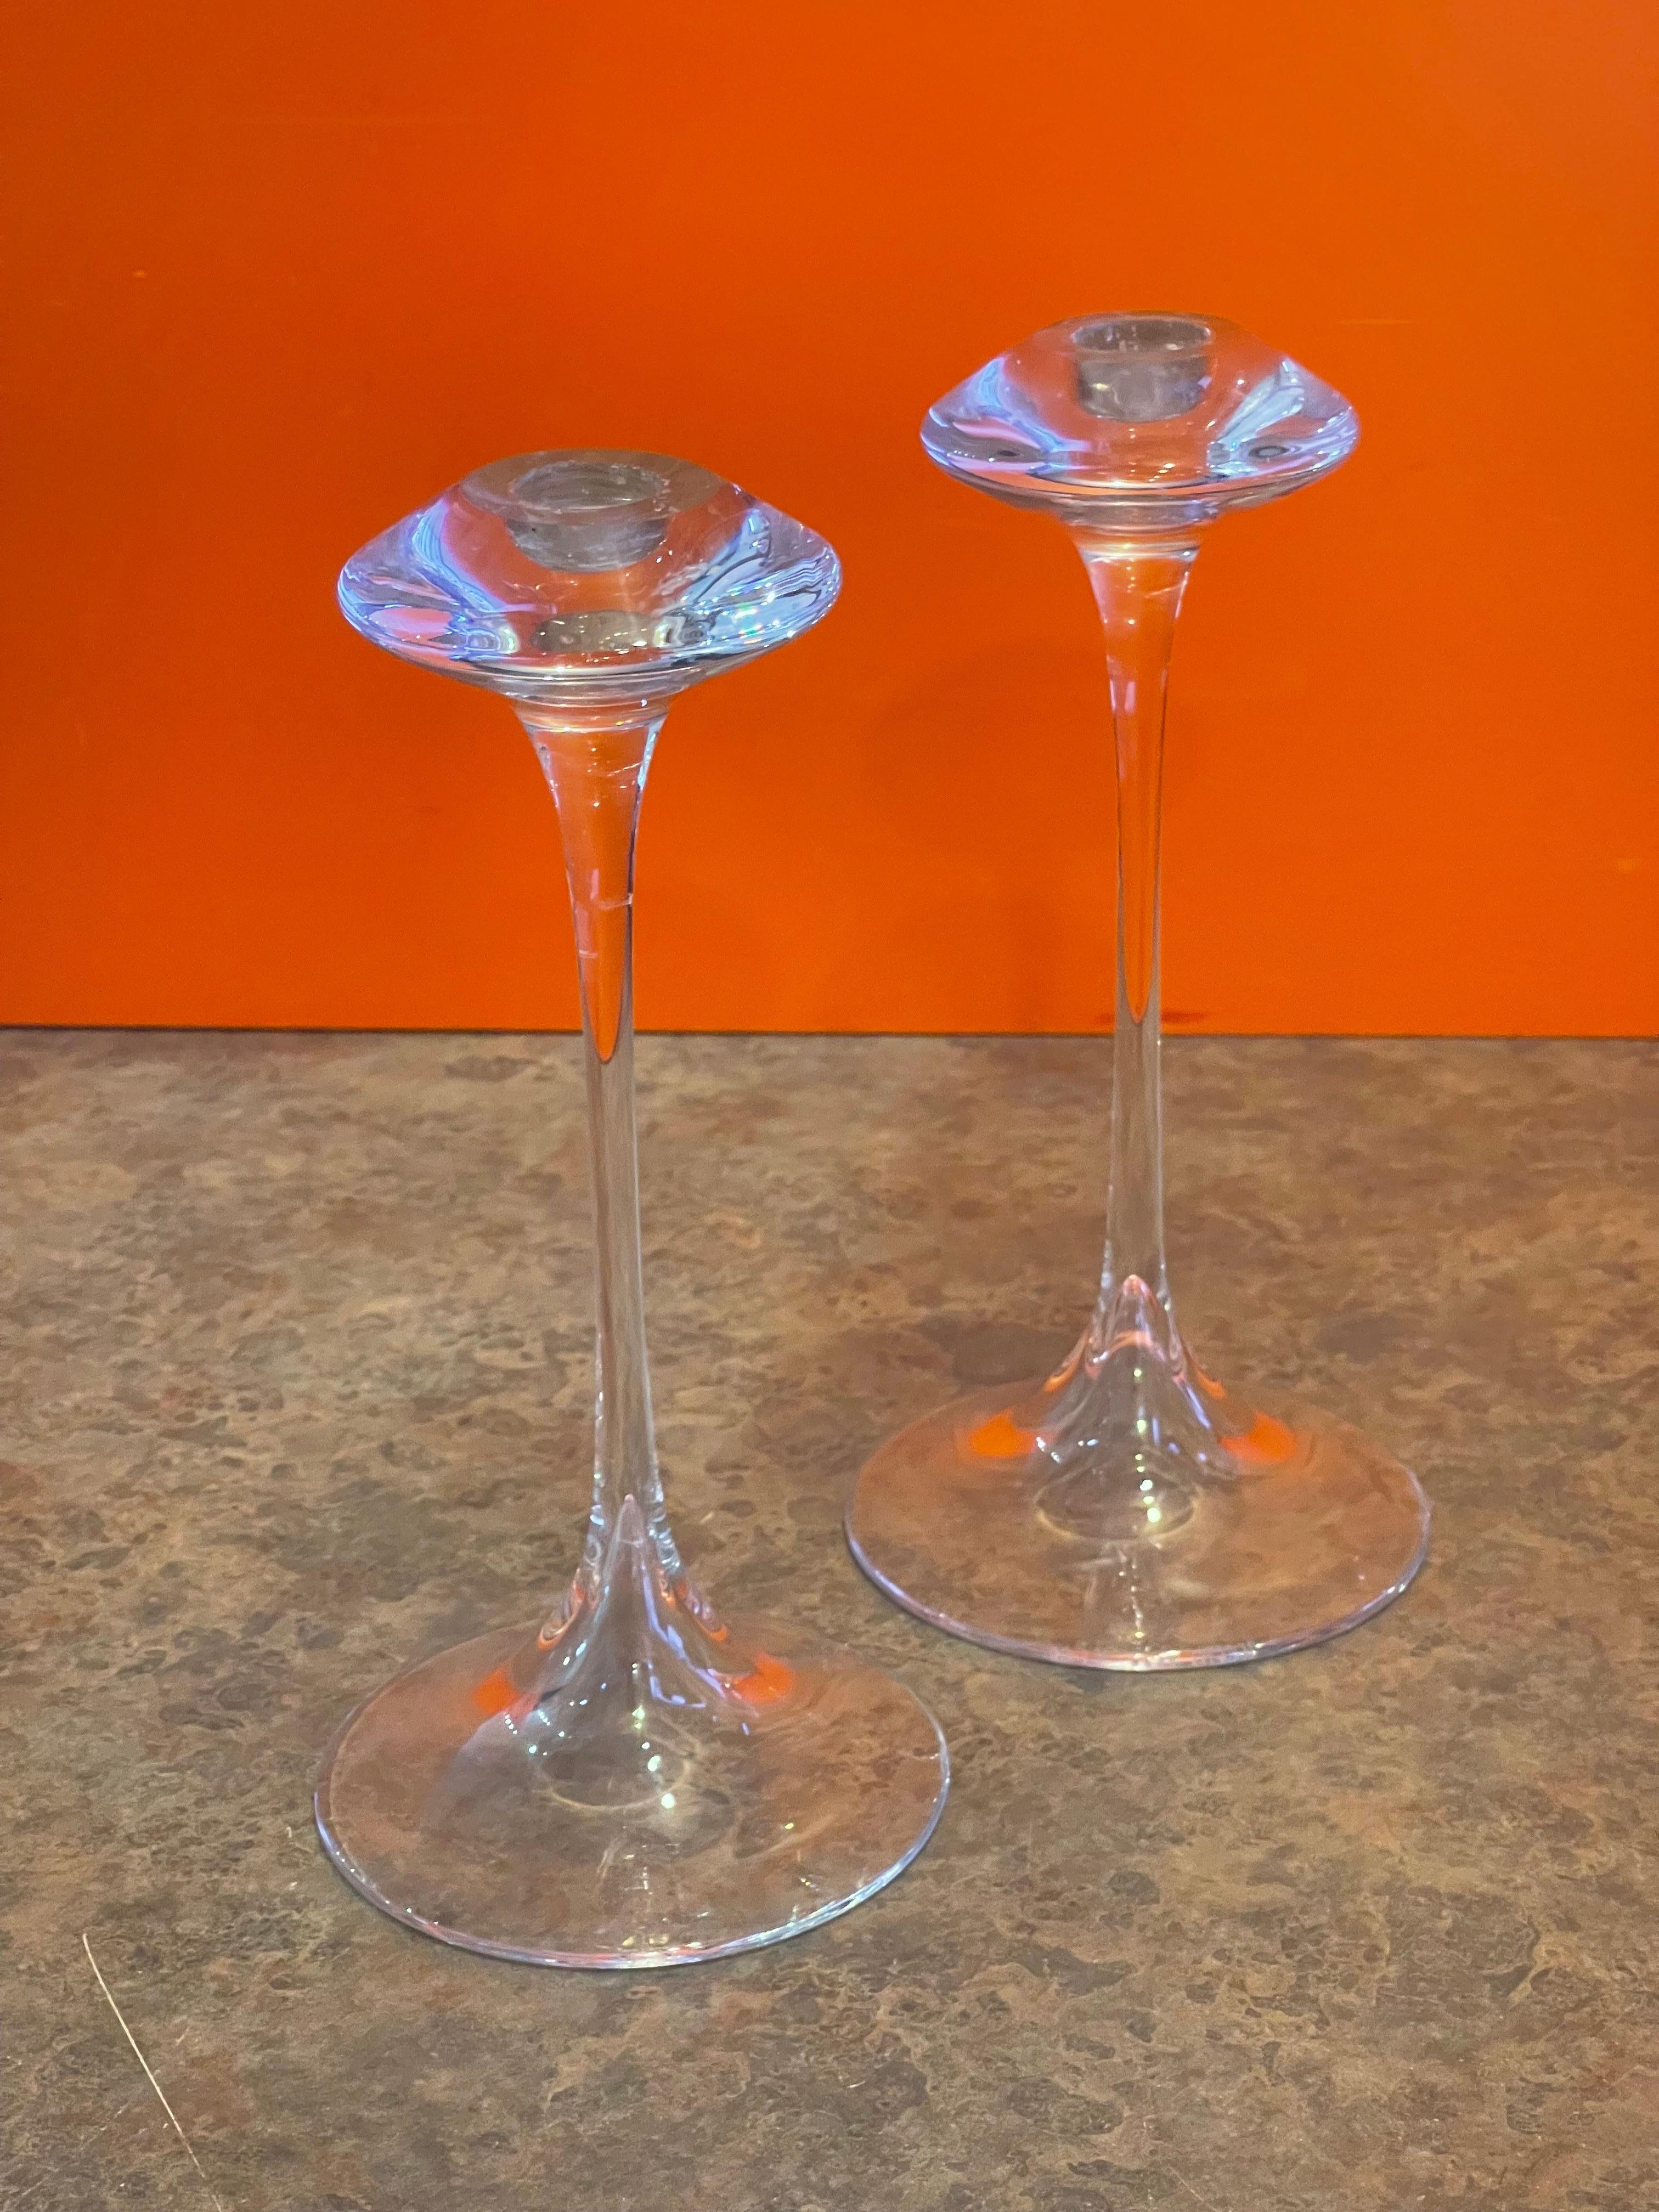 Minimalist pair of crystal candle holders by Kjell Engman for Kosta Boda, circa 1990s. The pair are in great vintage condition with no chips or cracks and measure 4